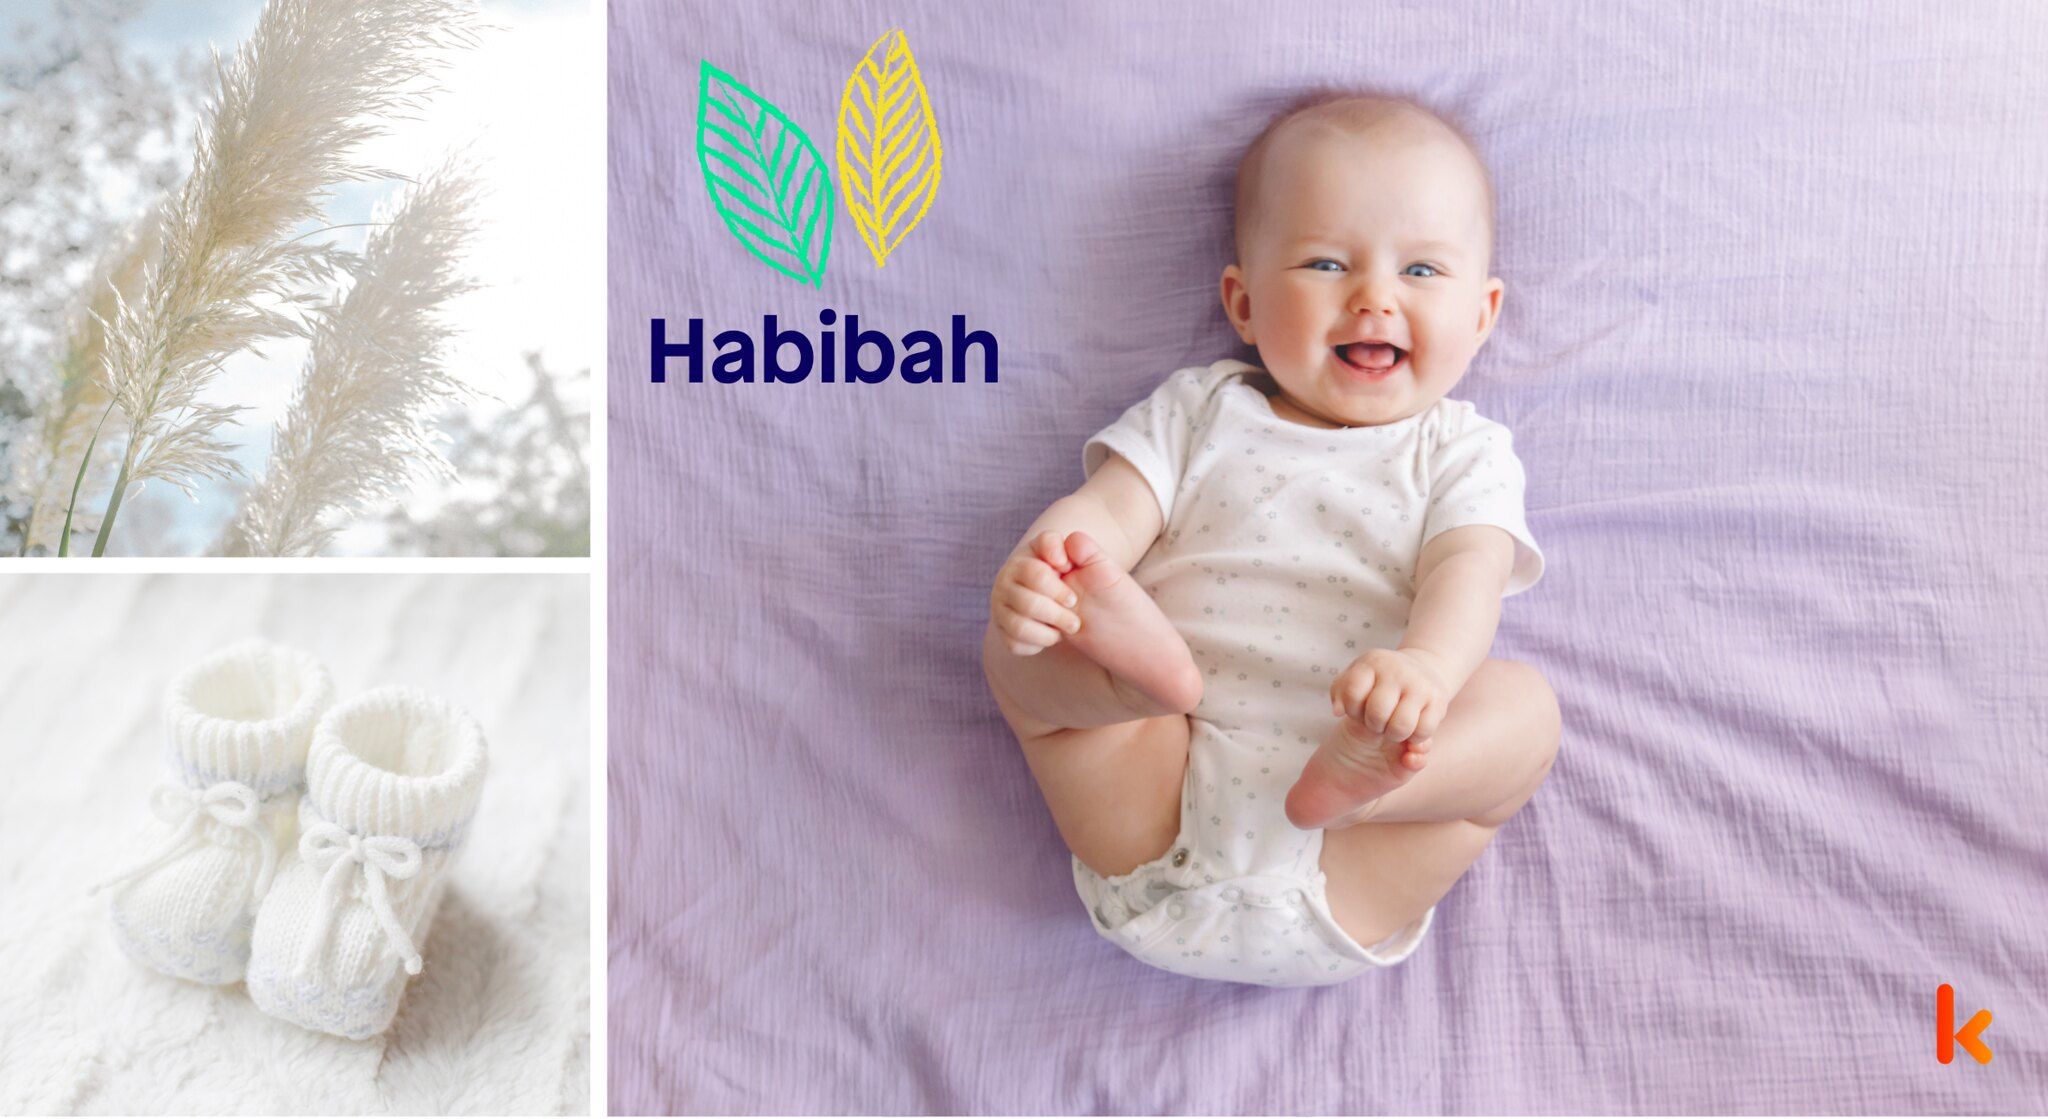 Meaning of the name Habibah